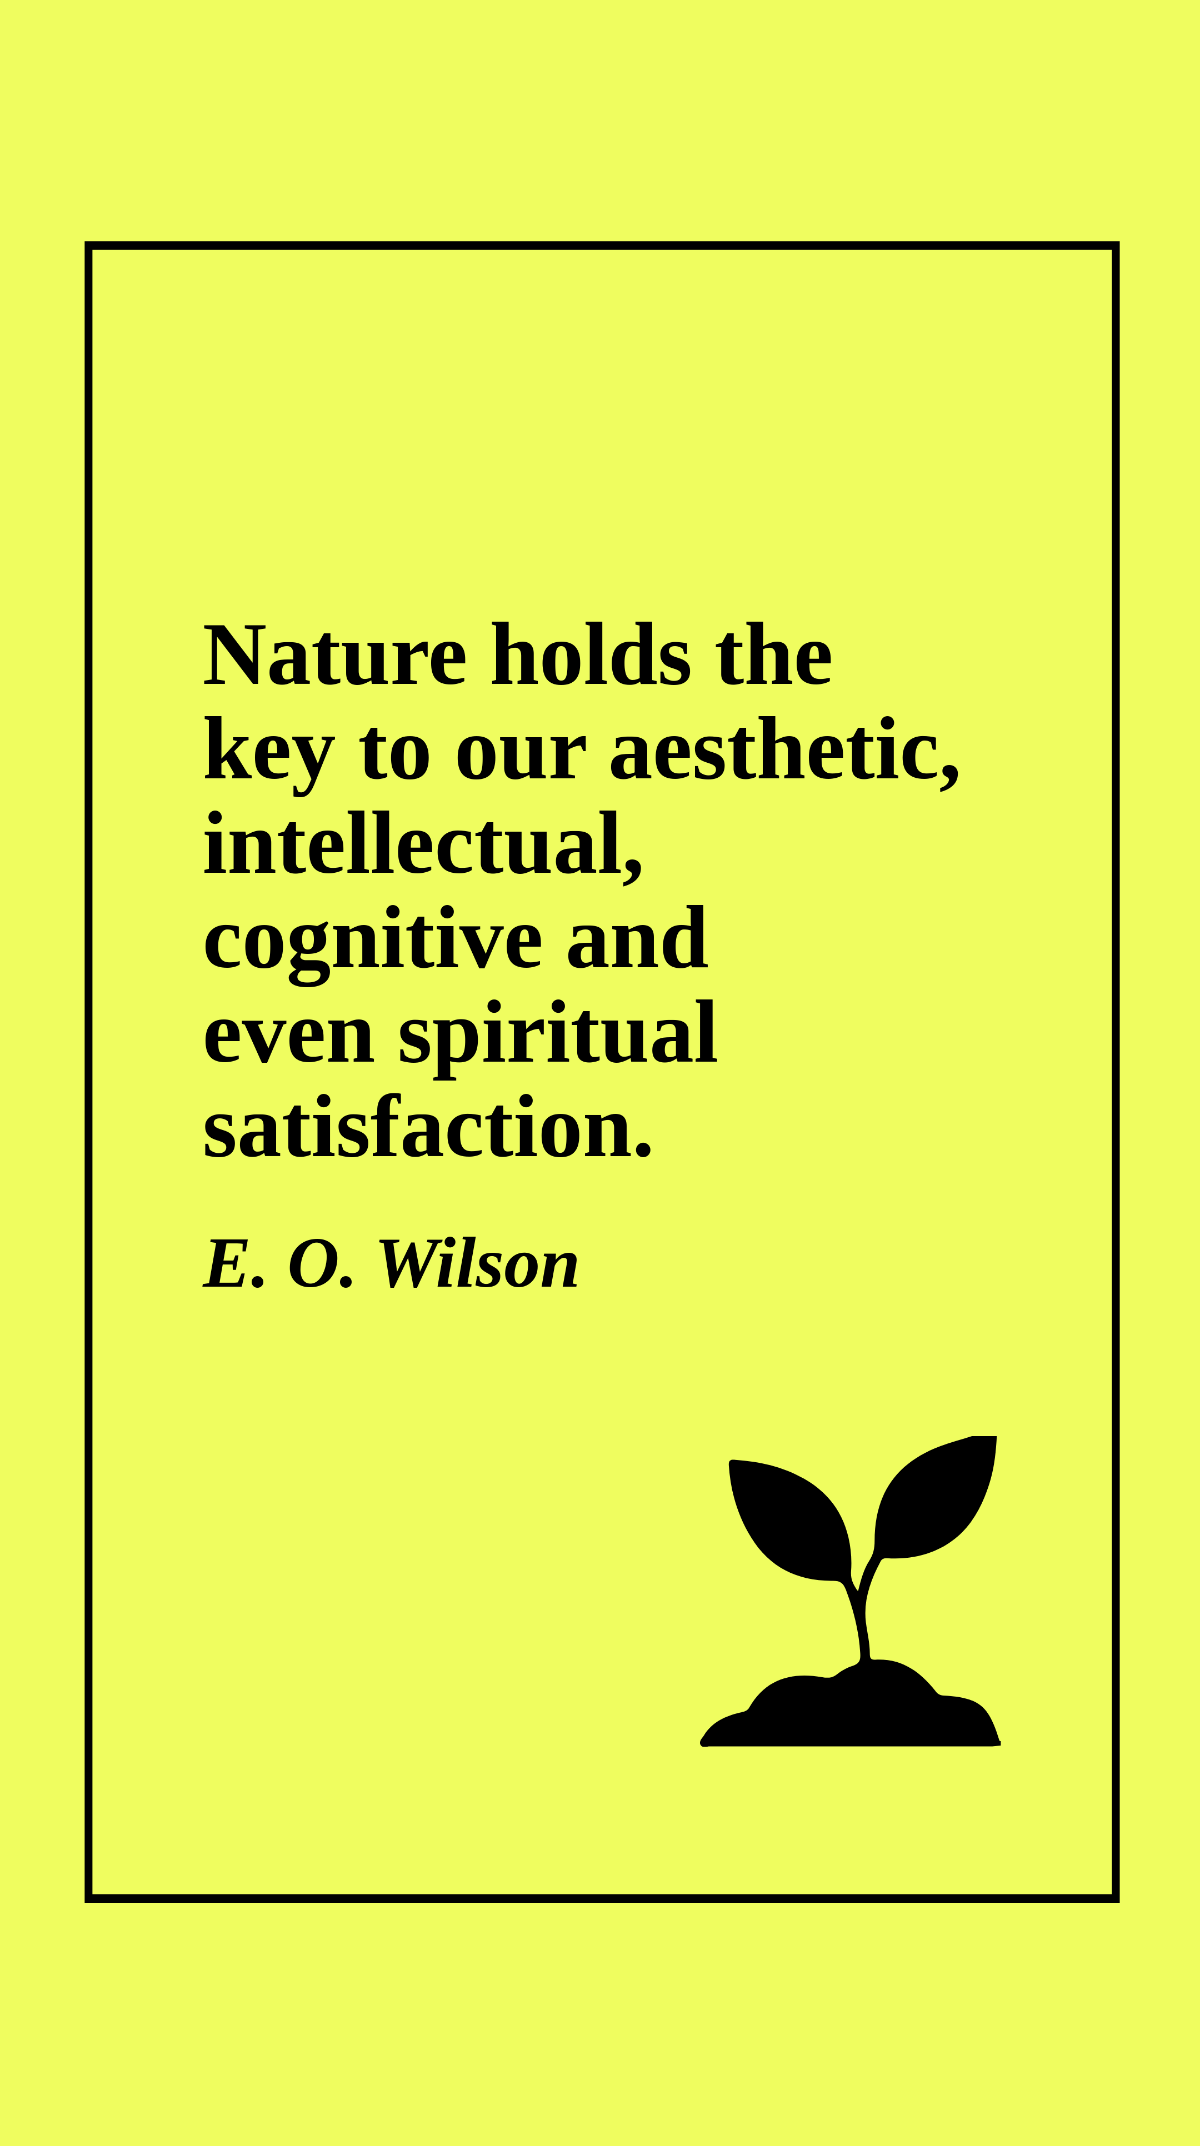 E. O. Wilson - Nature holds the key to our aesthetic, intellectual, cognitive and even spiritual satisfaction.